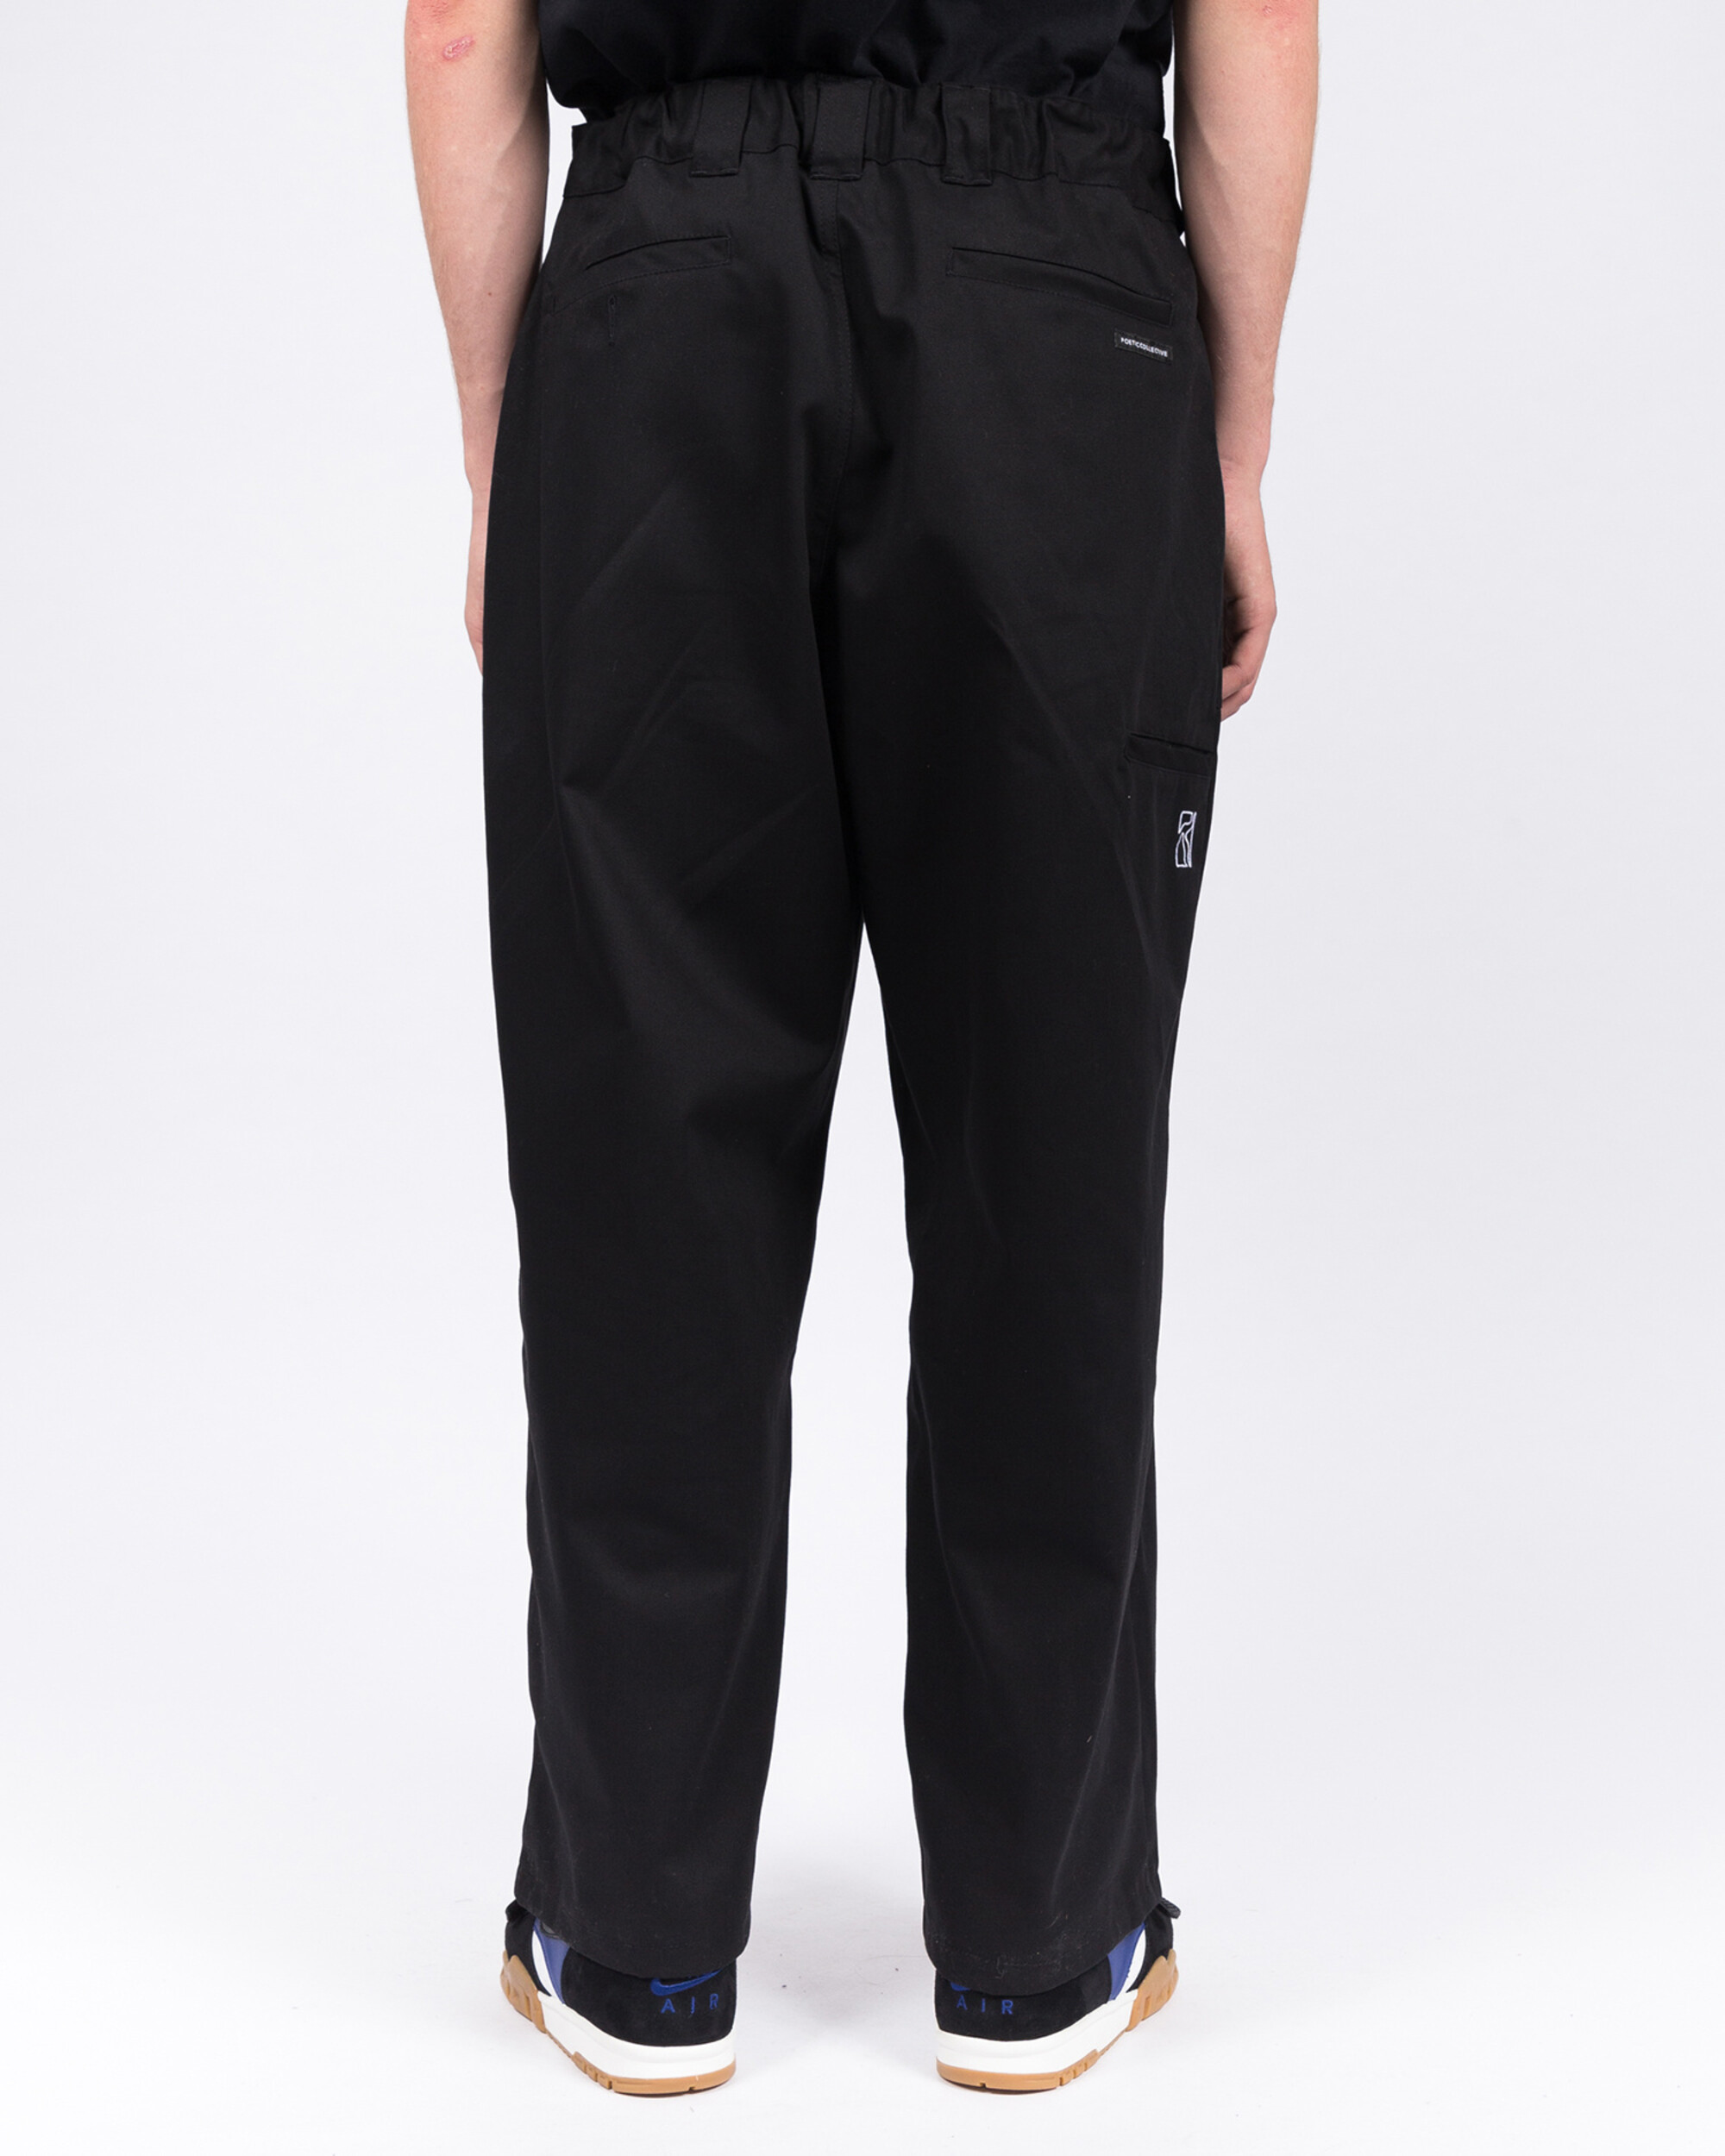 Poetic Collective Skate Pants